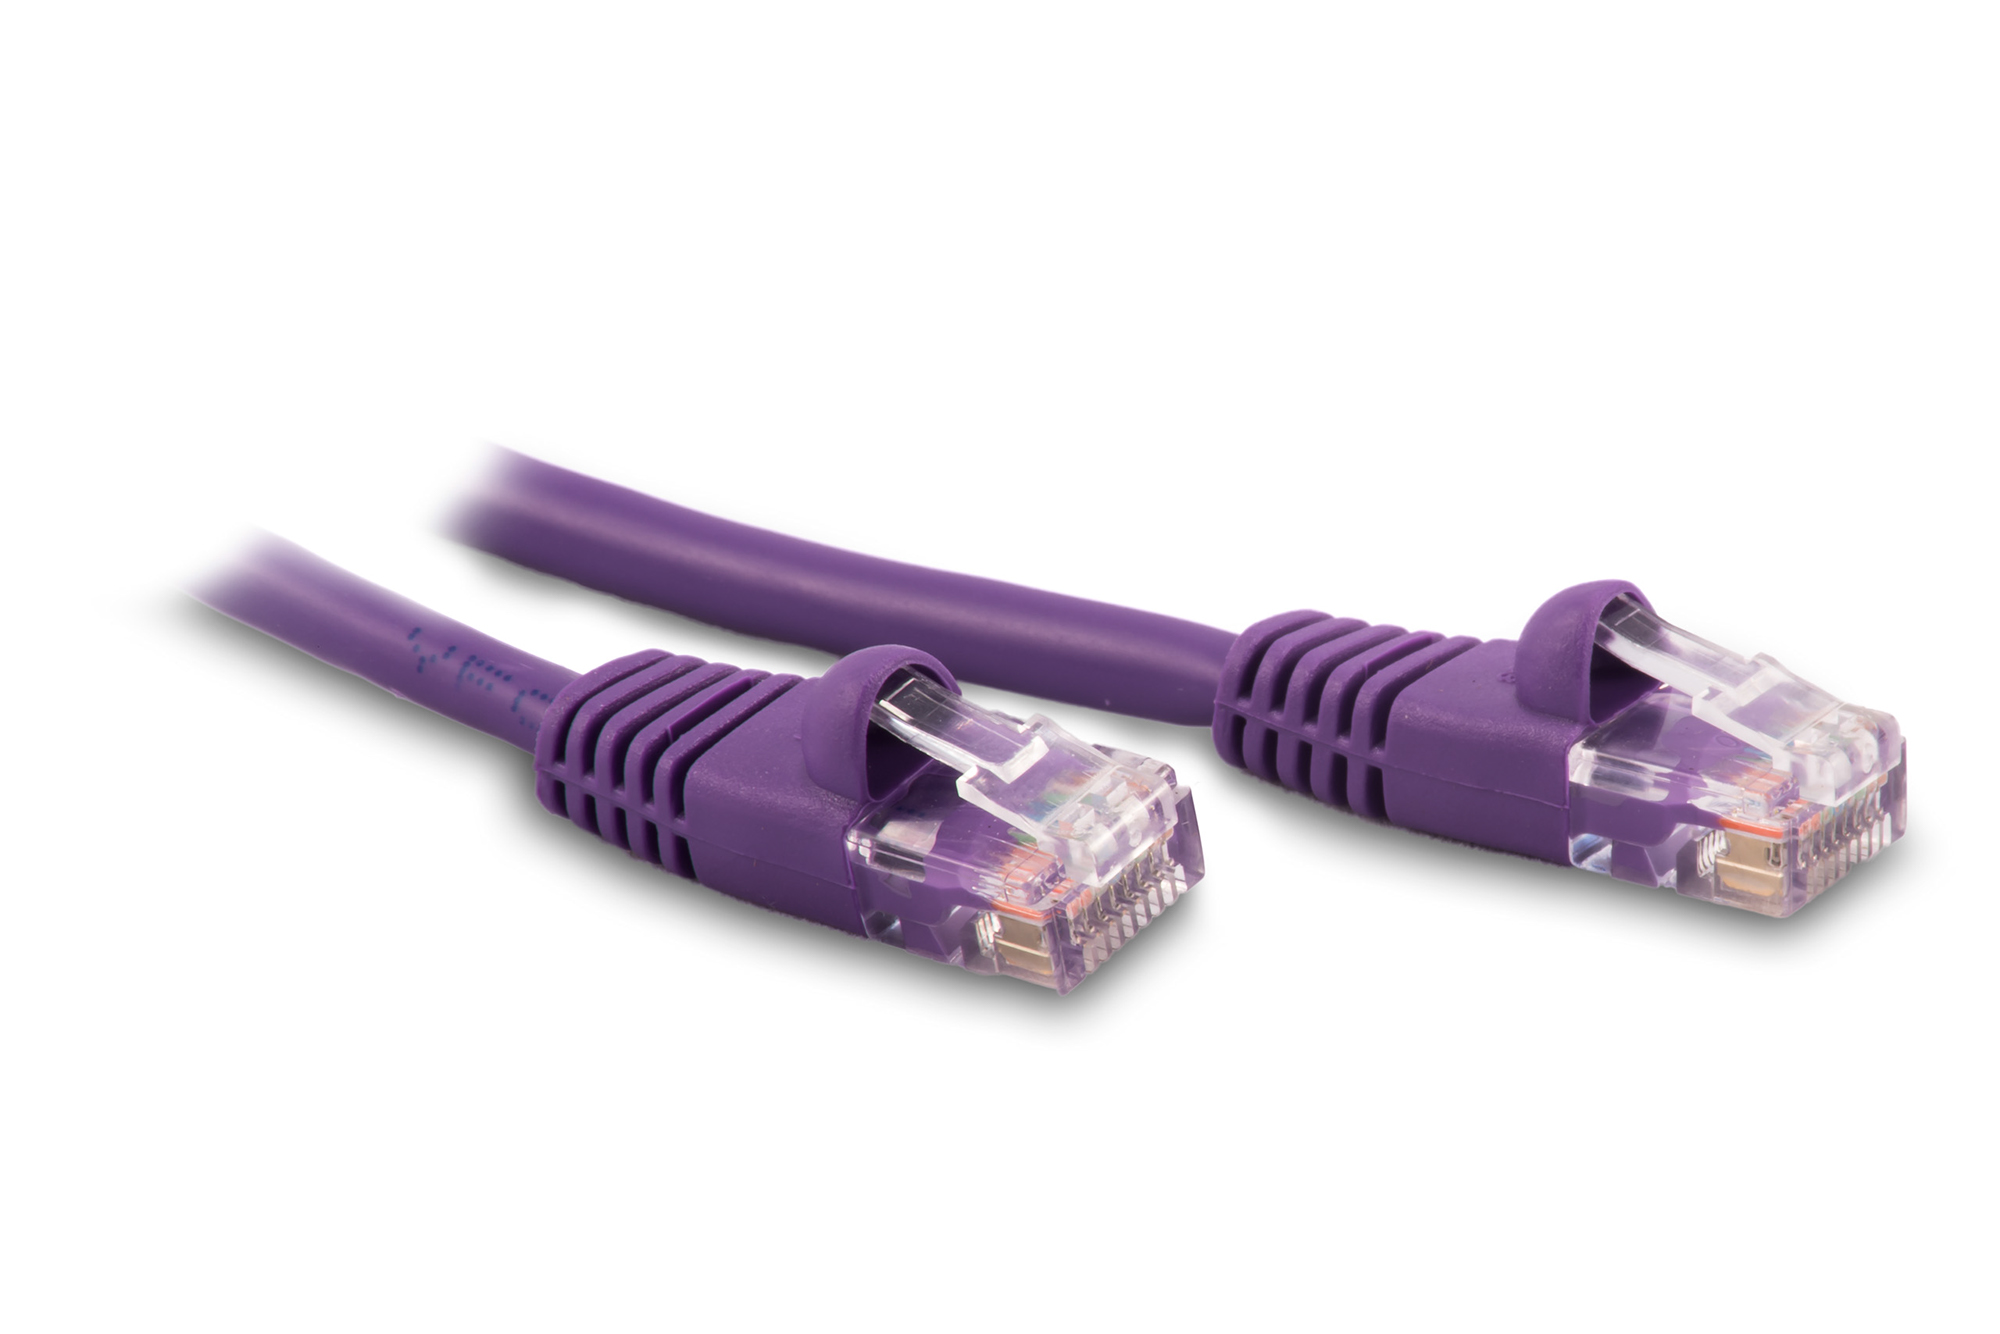 4ft Cat6 Ethernet Patch Cable - Violet Color - Snagless Boot